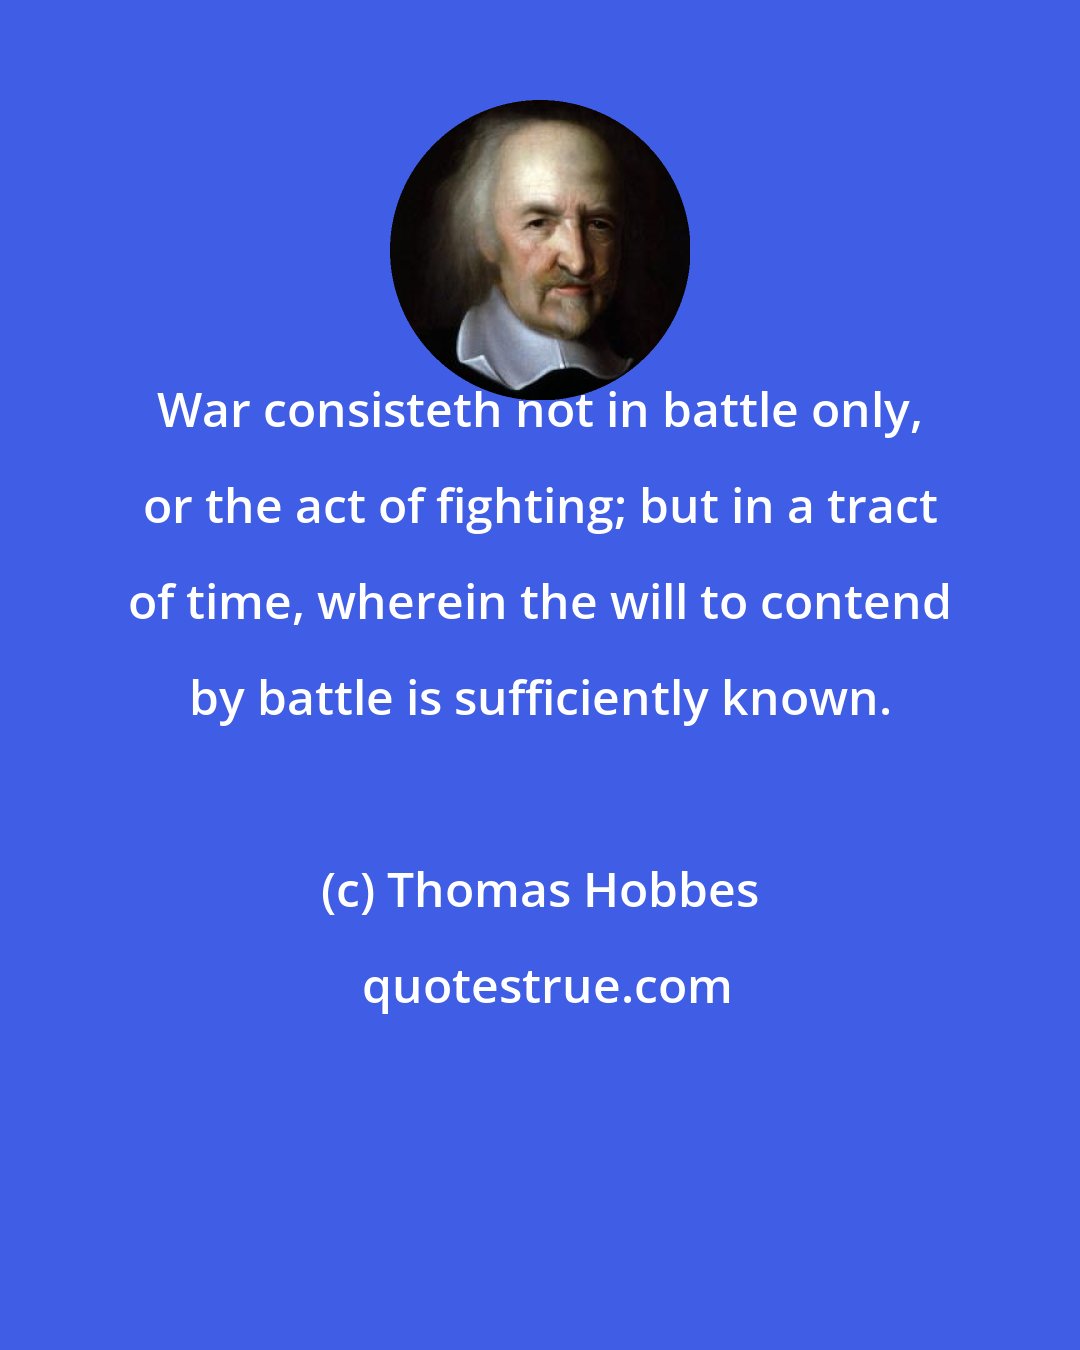 Thomas Hobbes: War consisteth not in battle only, or the act of fighting; but in a tract of time, wherein the will to contend by battle is sufficiently known.